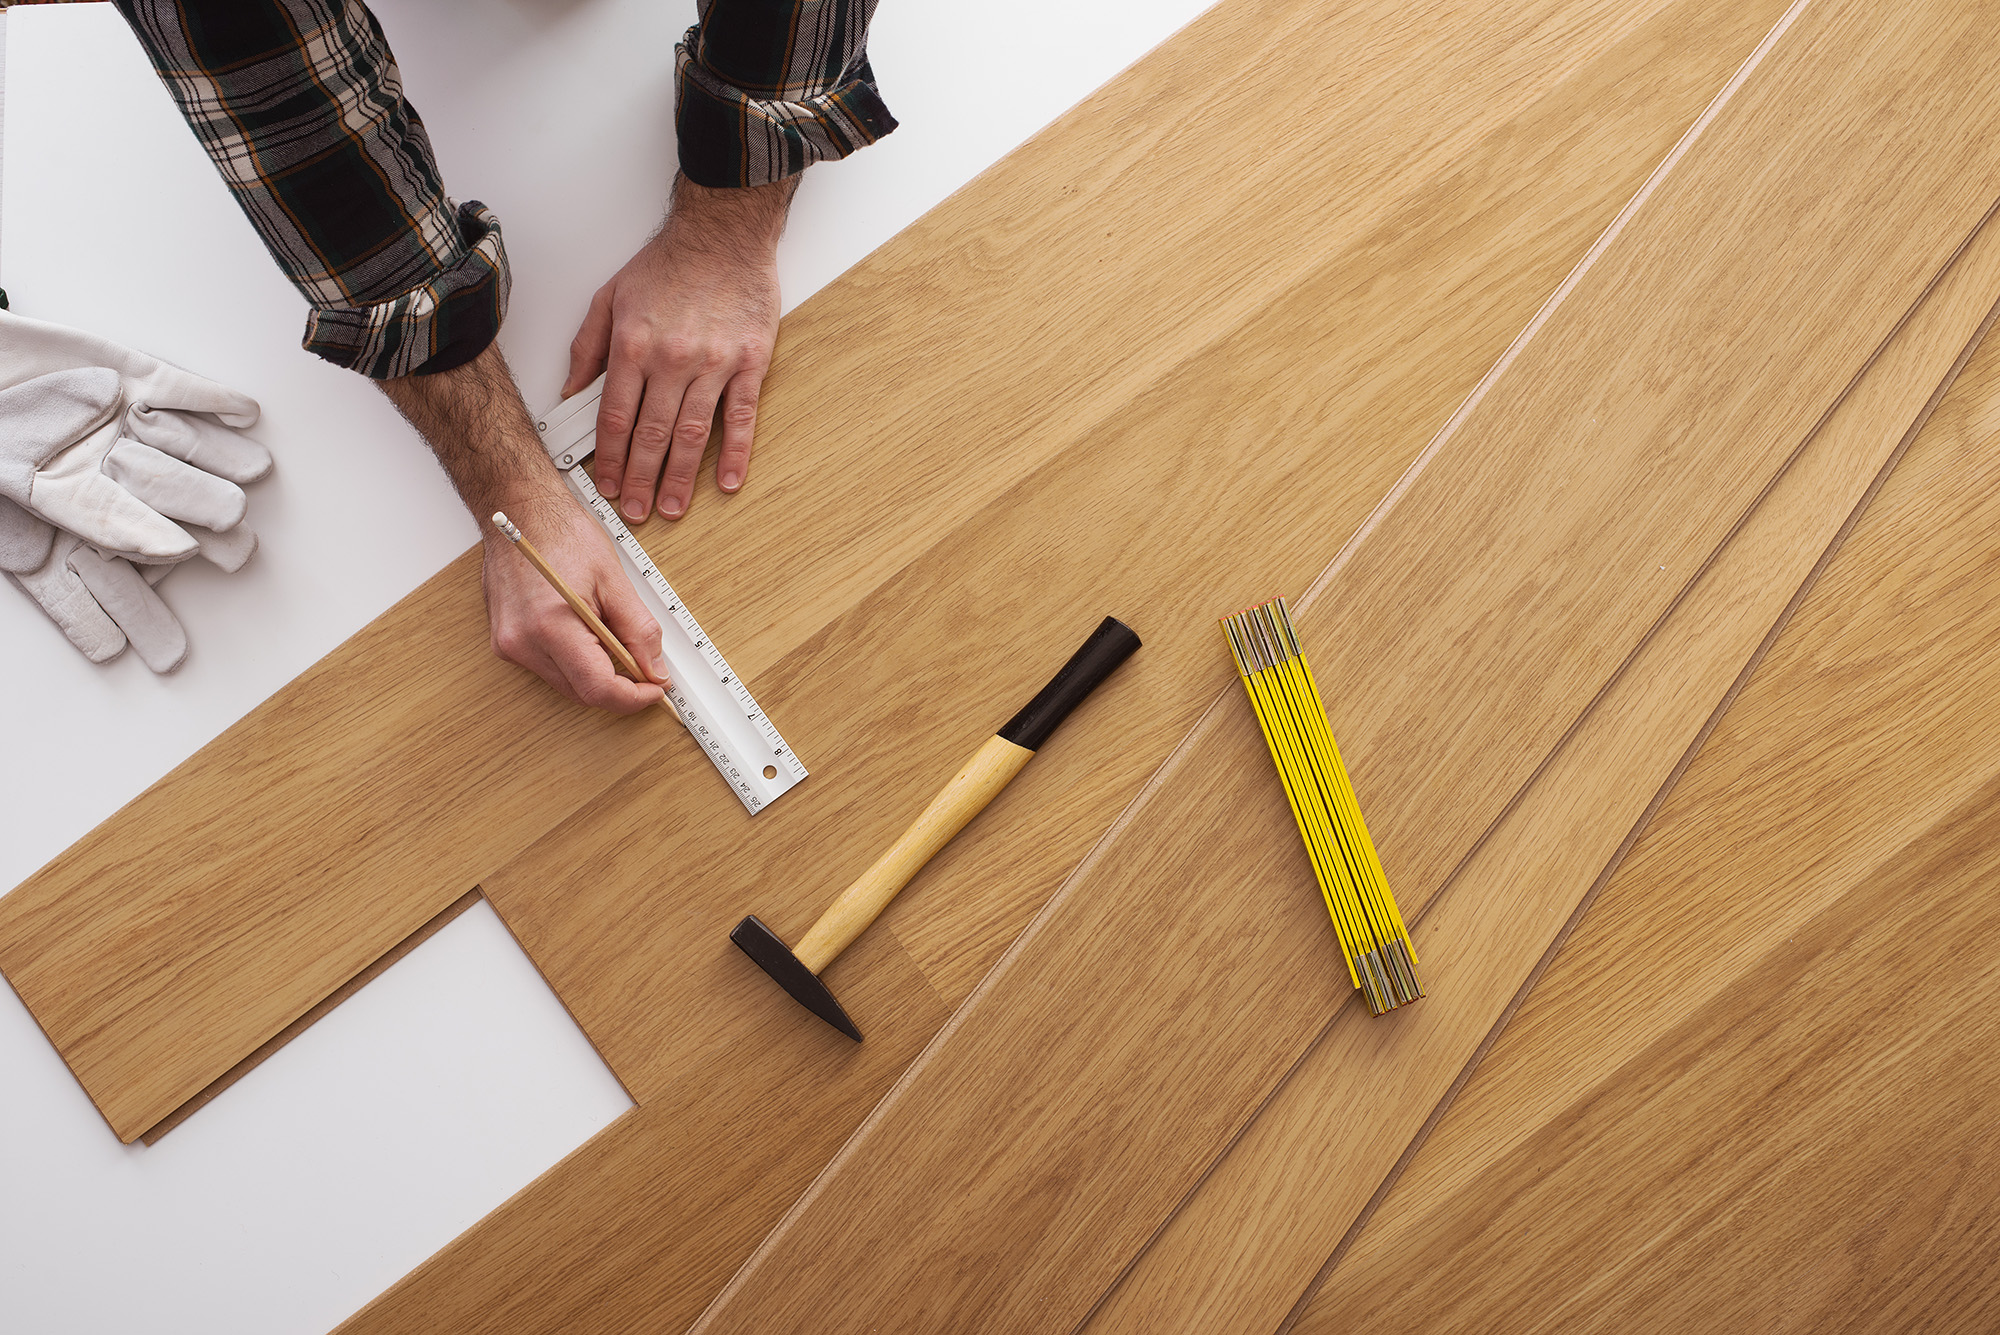 Carpenter installing a wooden flooring and measuring with a precision ruler, top view